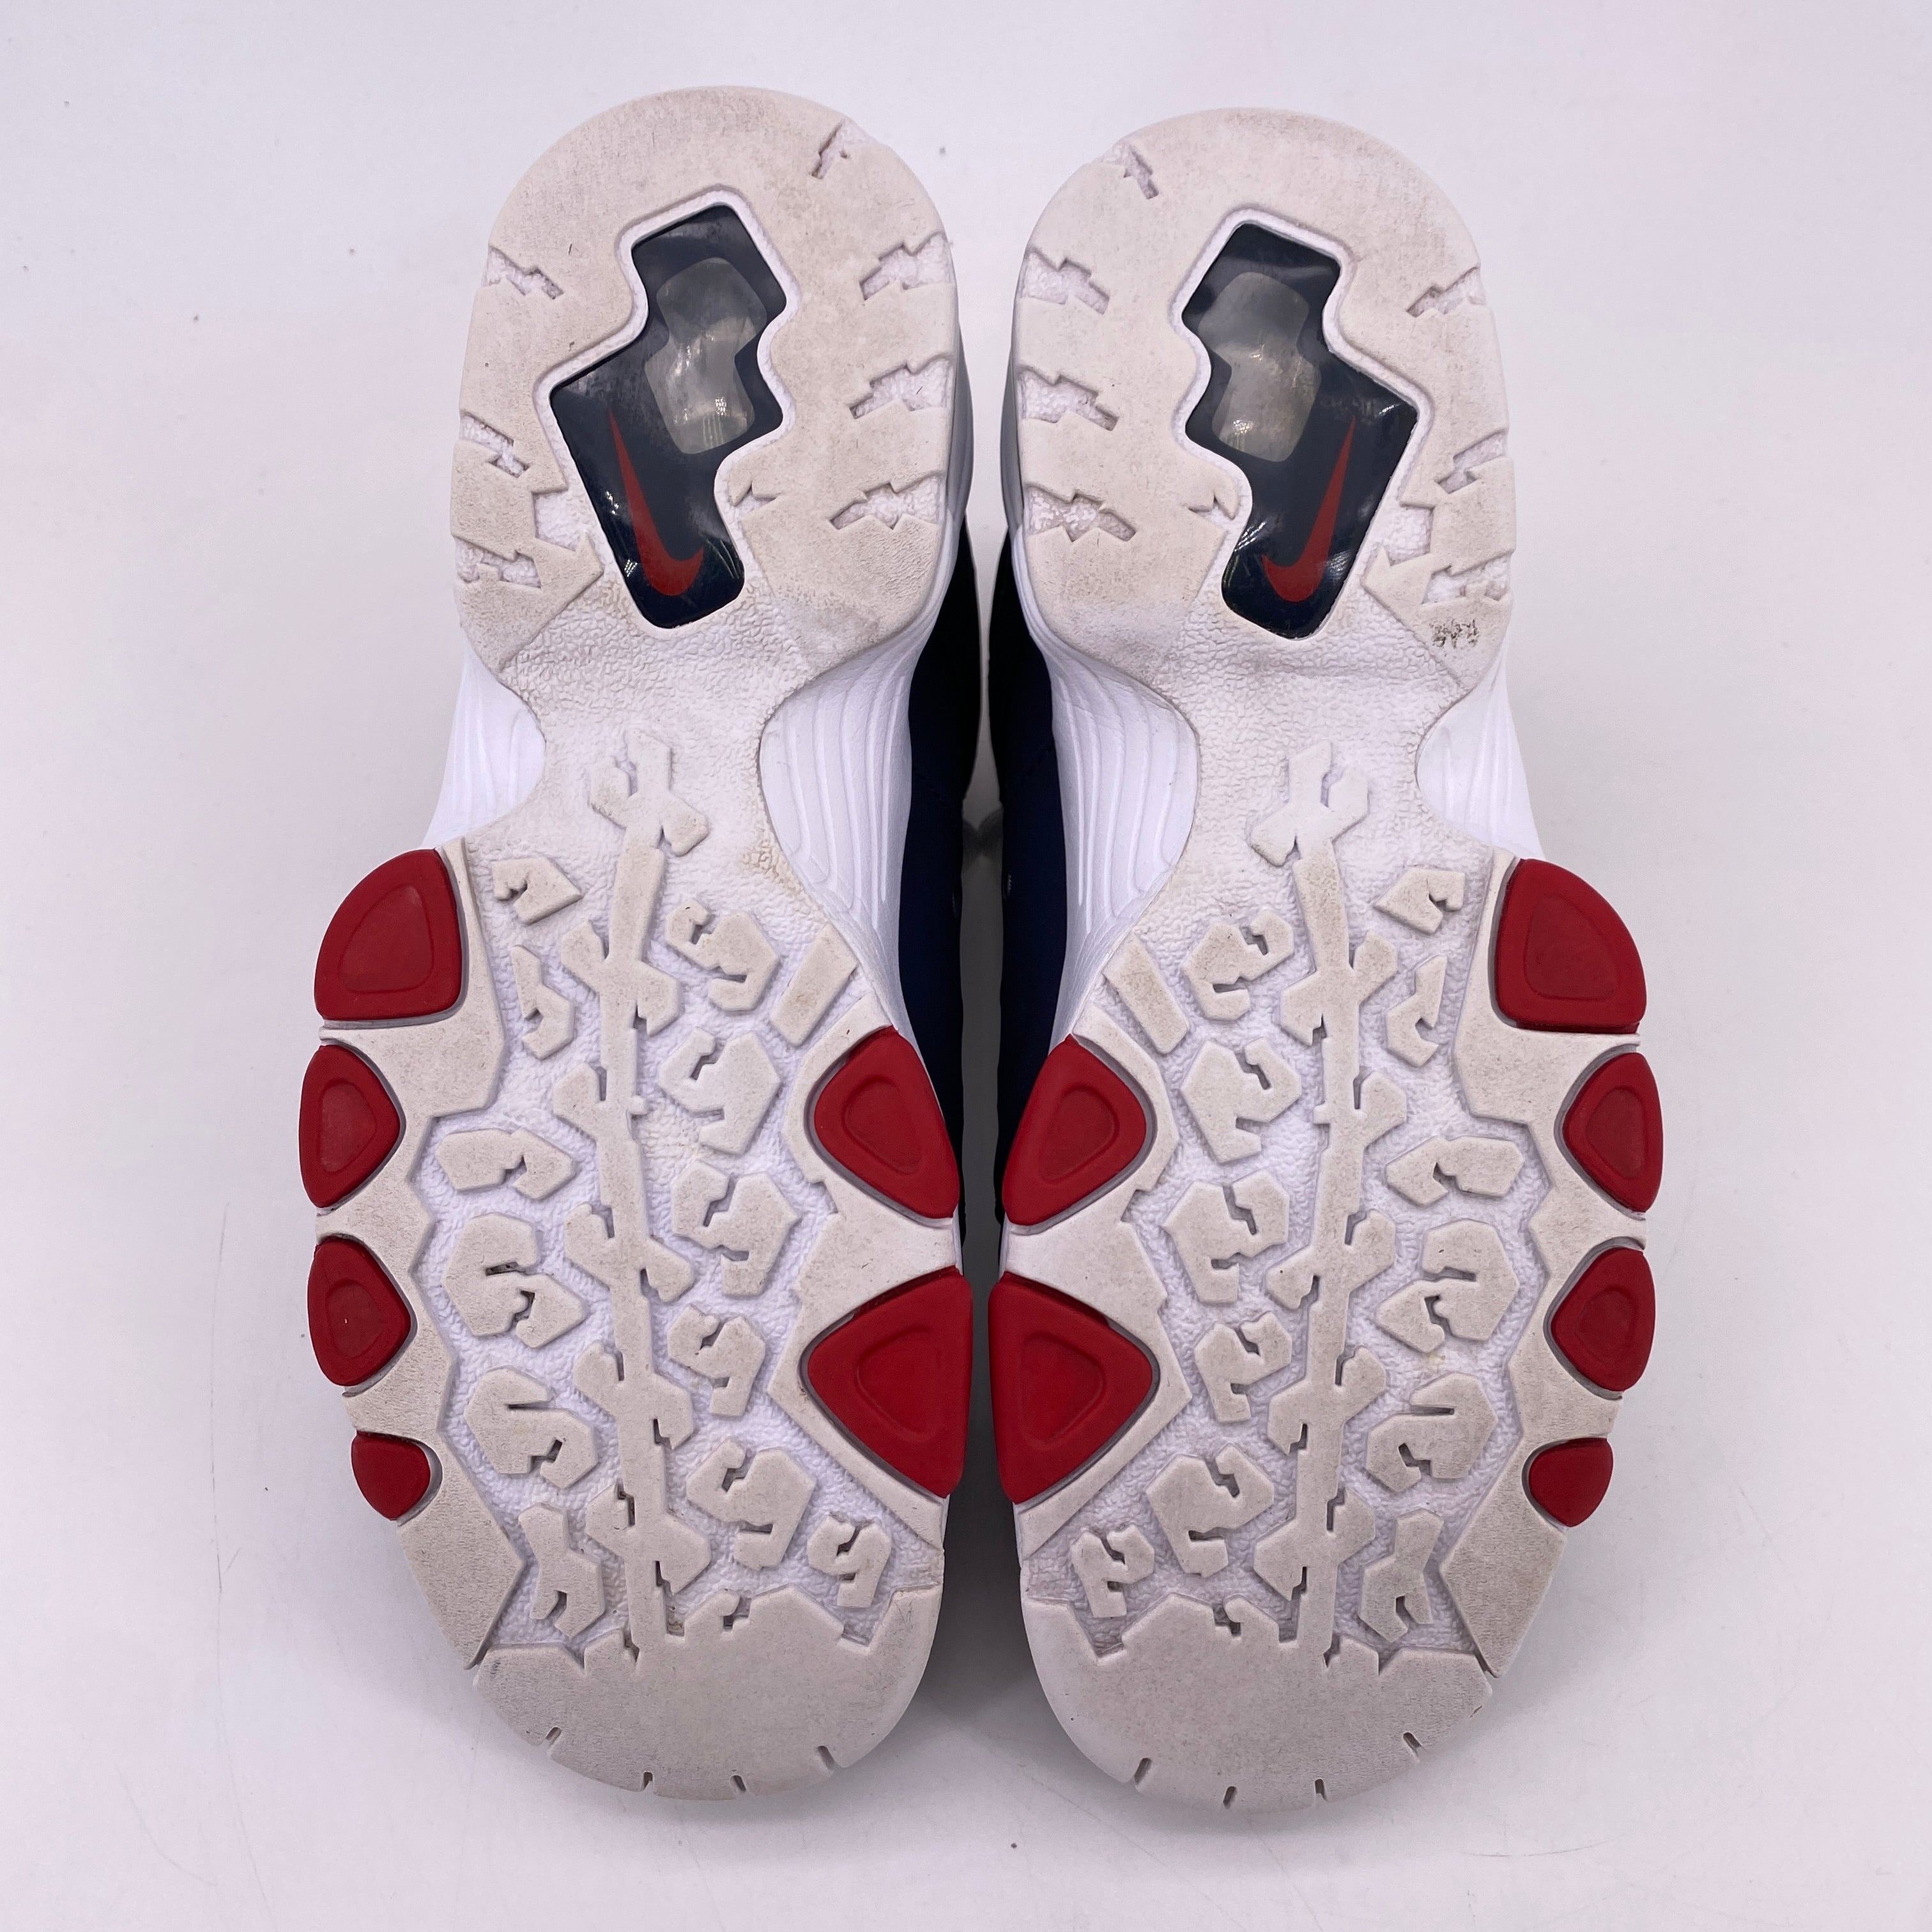 Nike Air Max 2 CB 94 &quot;Usa&quot; 2021 Used Size 8